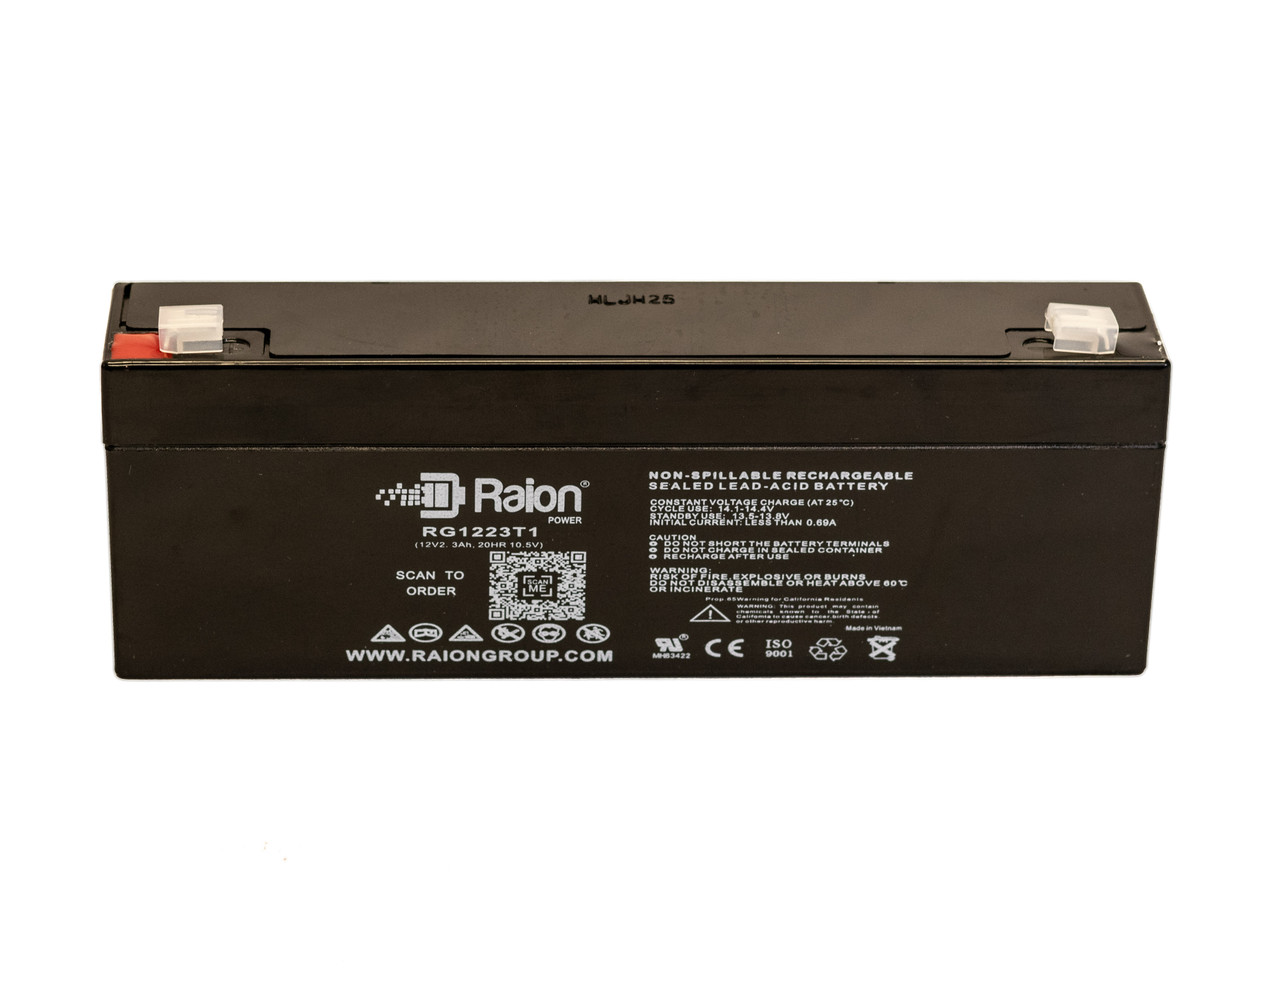 Raion Power 12V 2.3Ah SLA Battery With T1 Terminals For Alexander MB5515